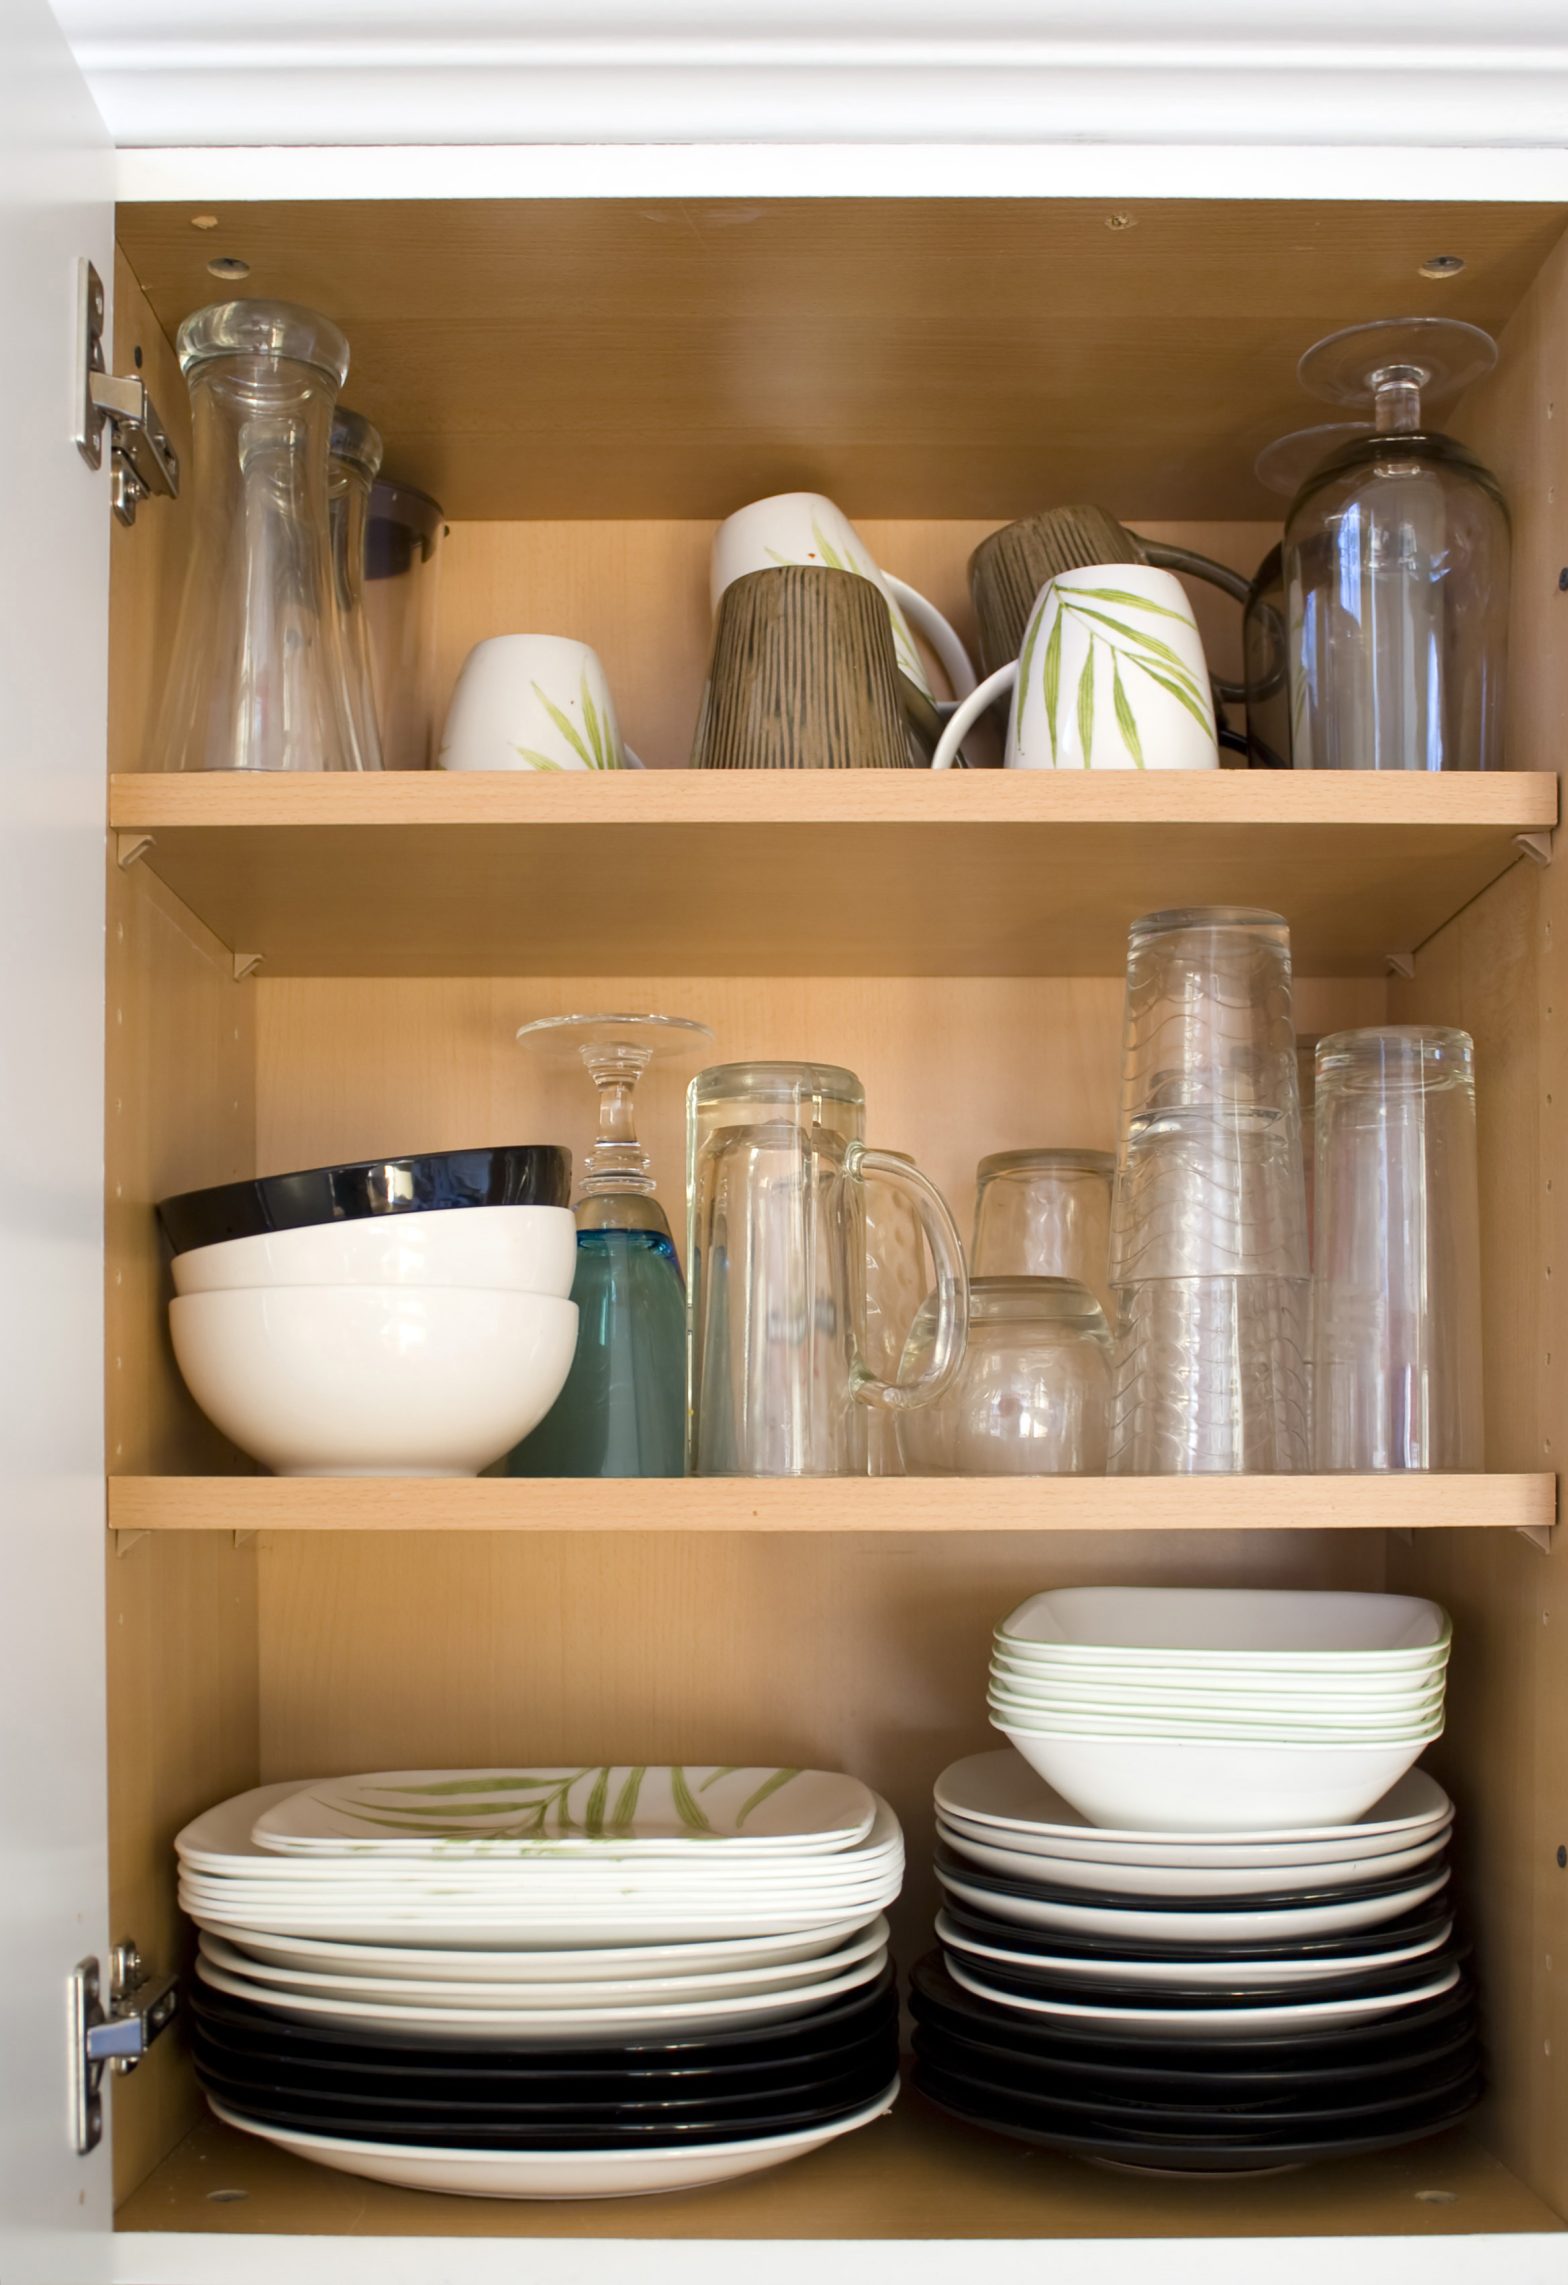 Cabinet filled with various dishware to pack for a move